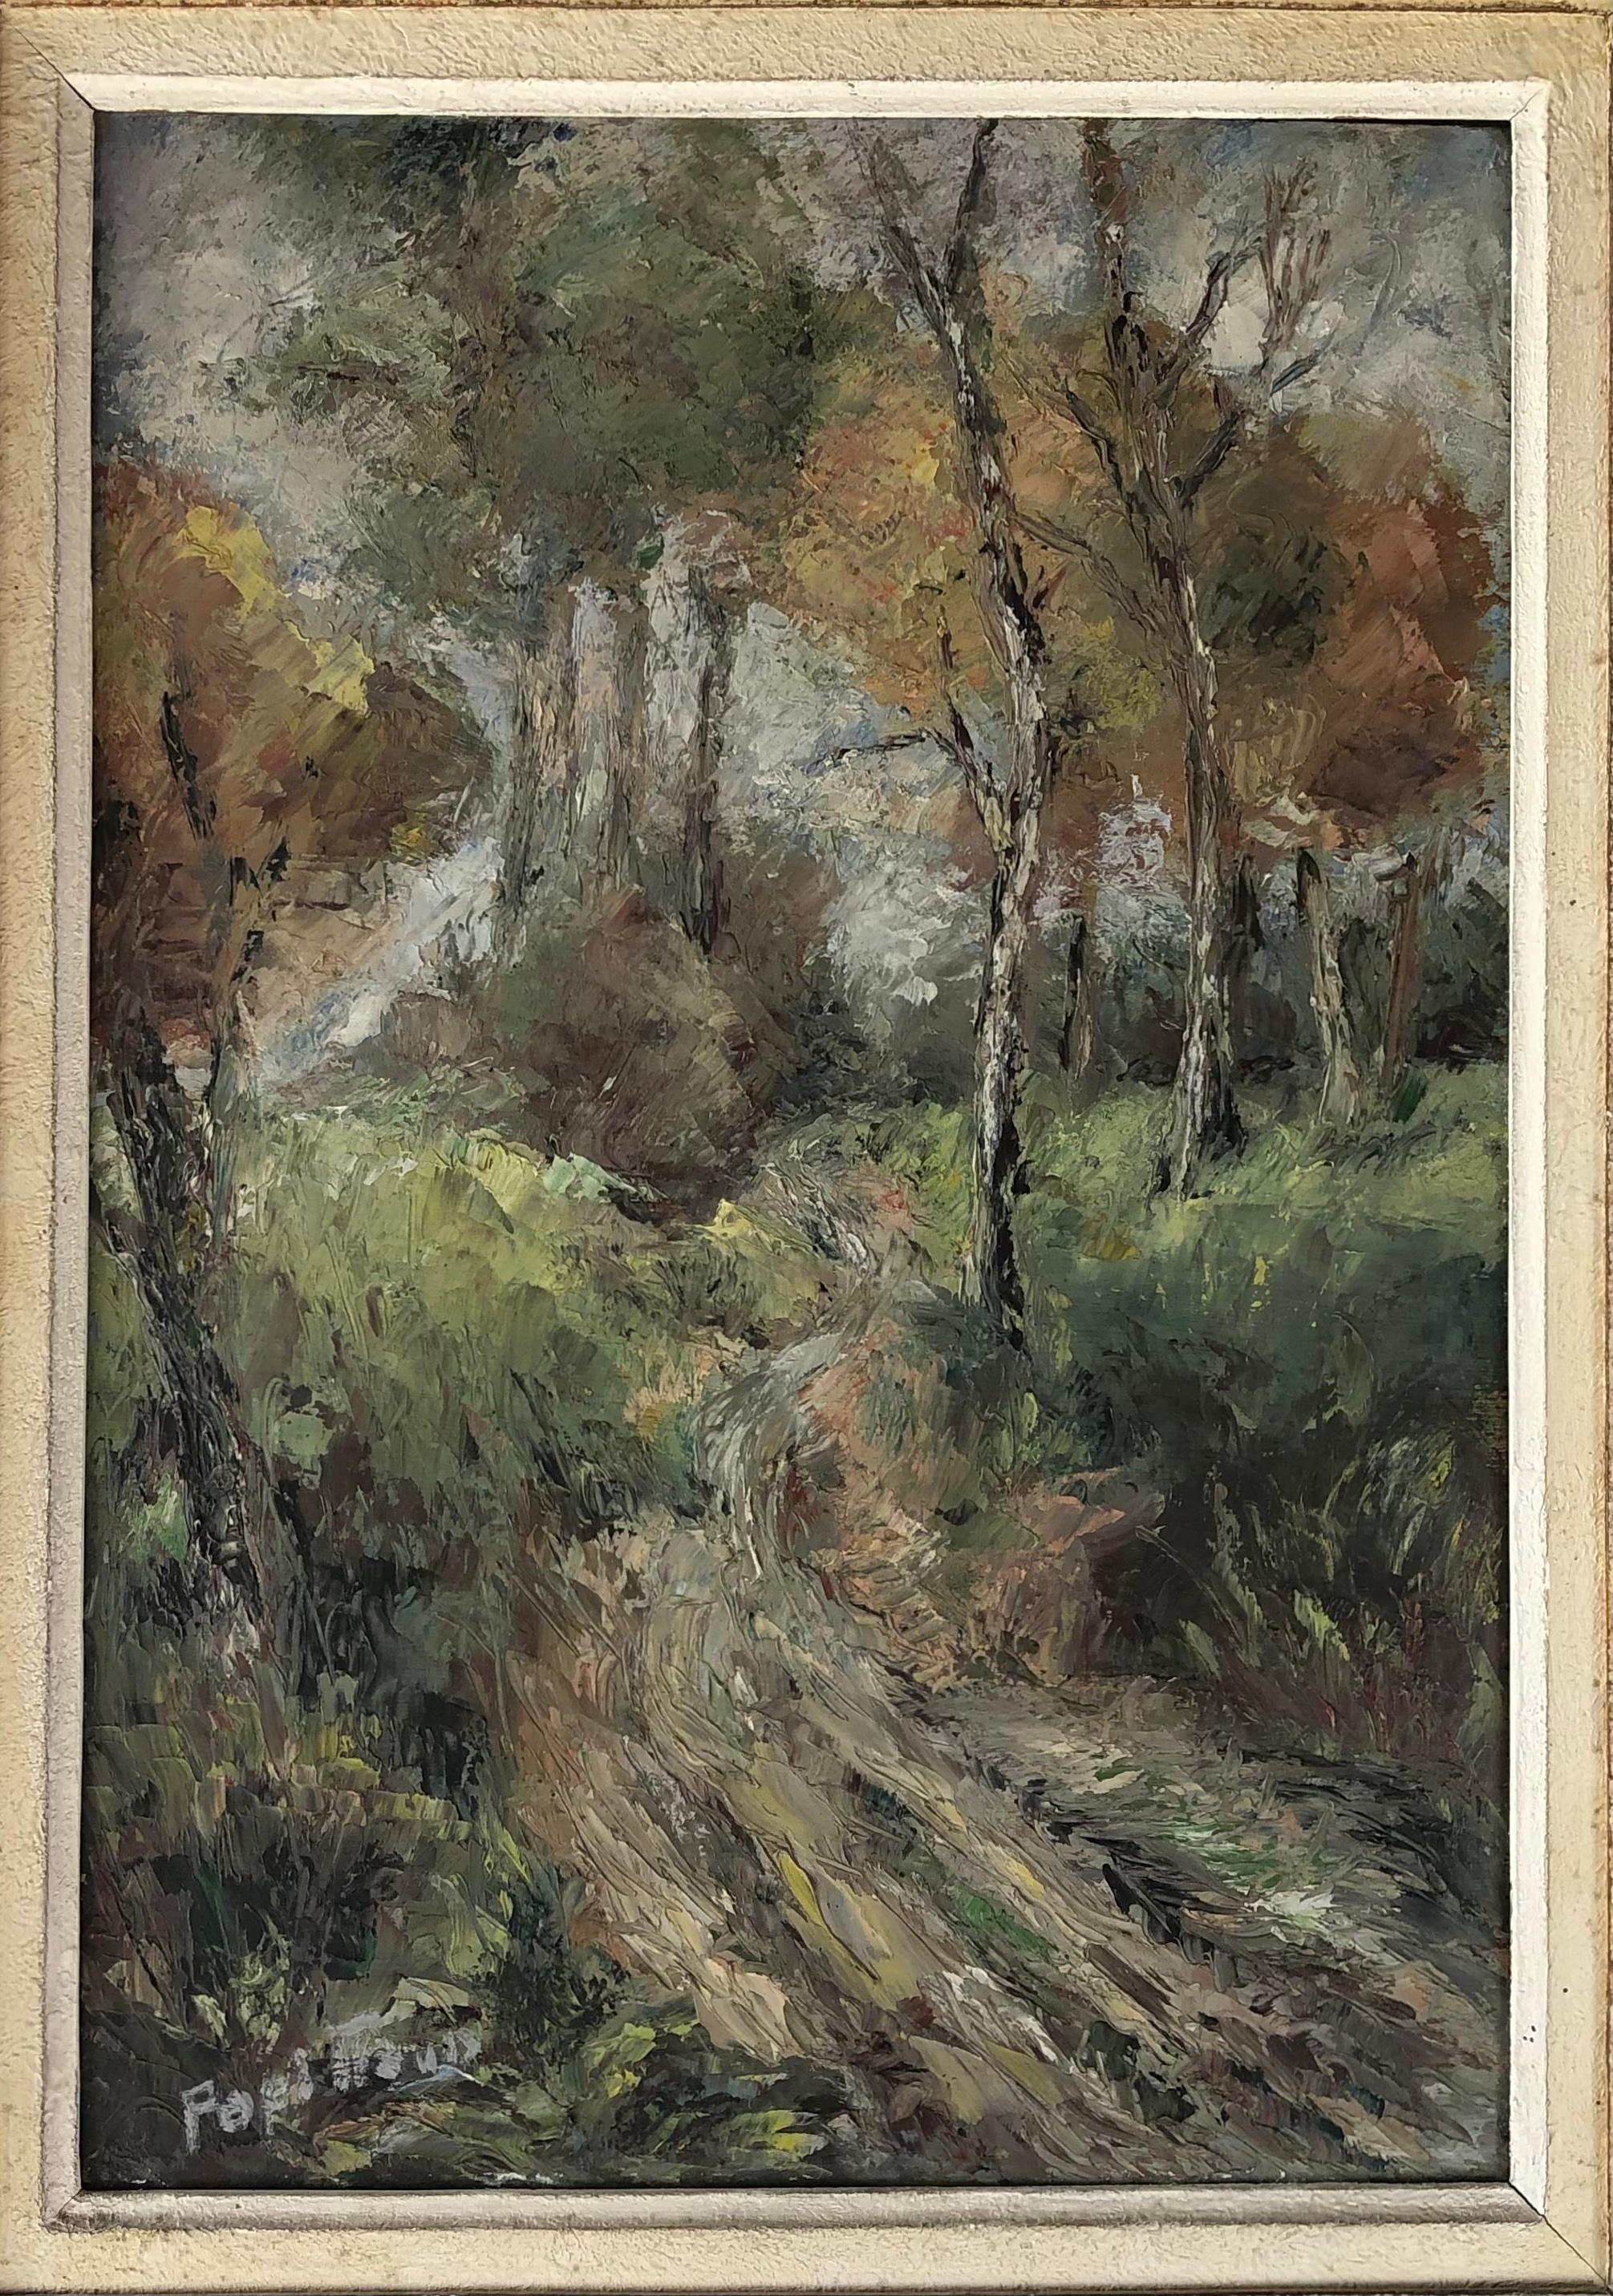 A striking oil on board painting depicting a country forest scene by French painter, Marcelle Papillaud. 

Marcelle PAPILLAUD was born in 1888, she painted numerous works of art that have been sold in many major auction houses. She had a wonderful,